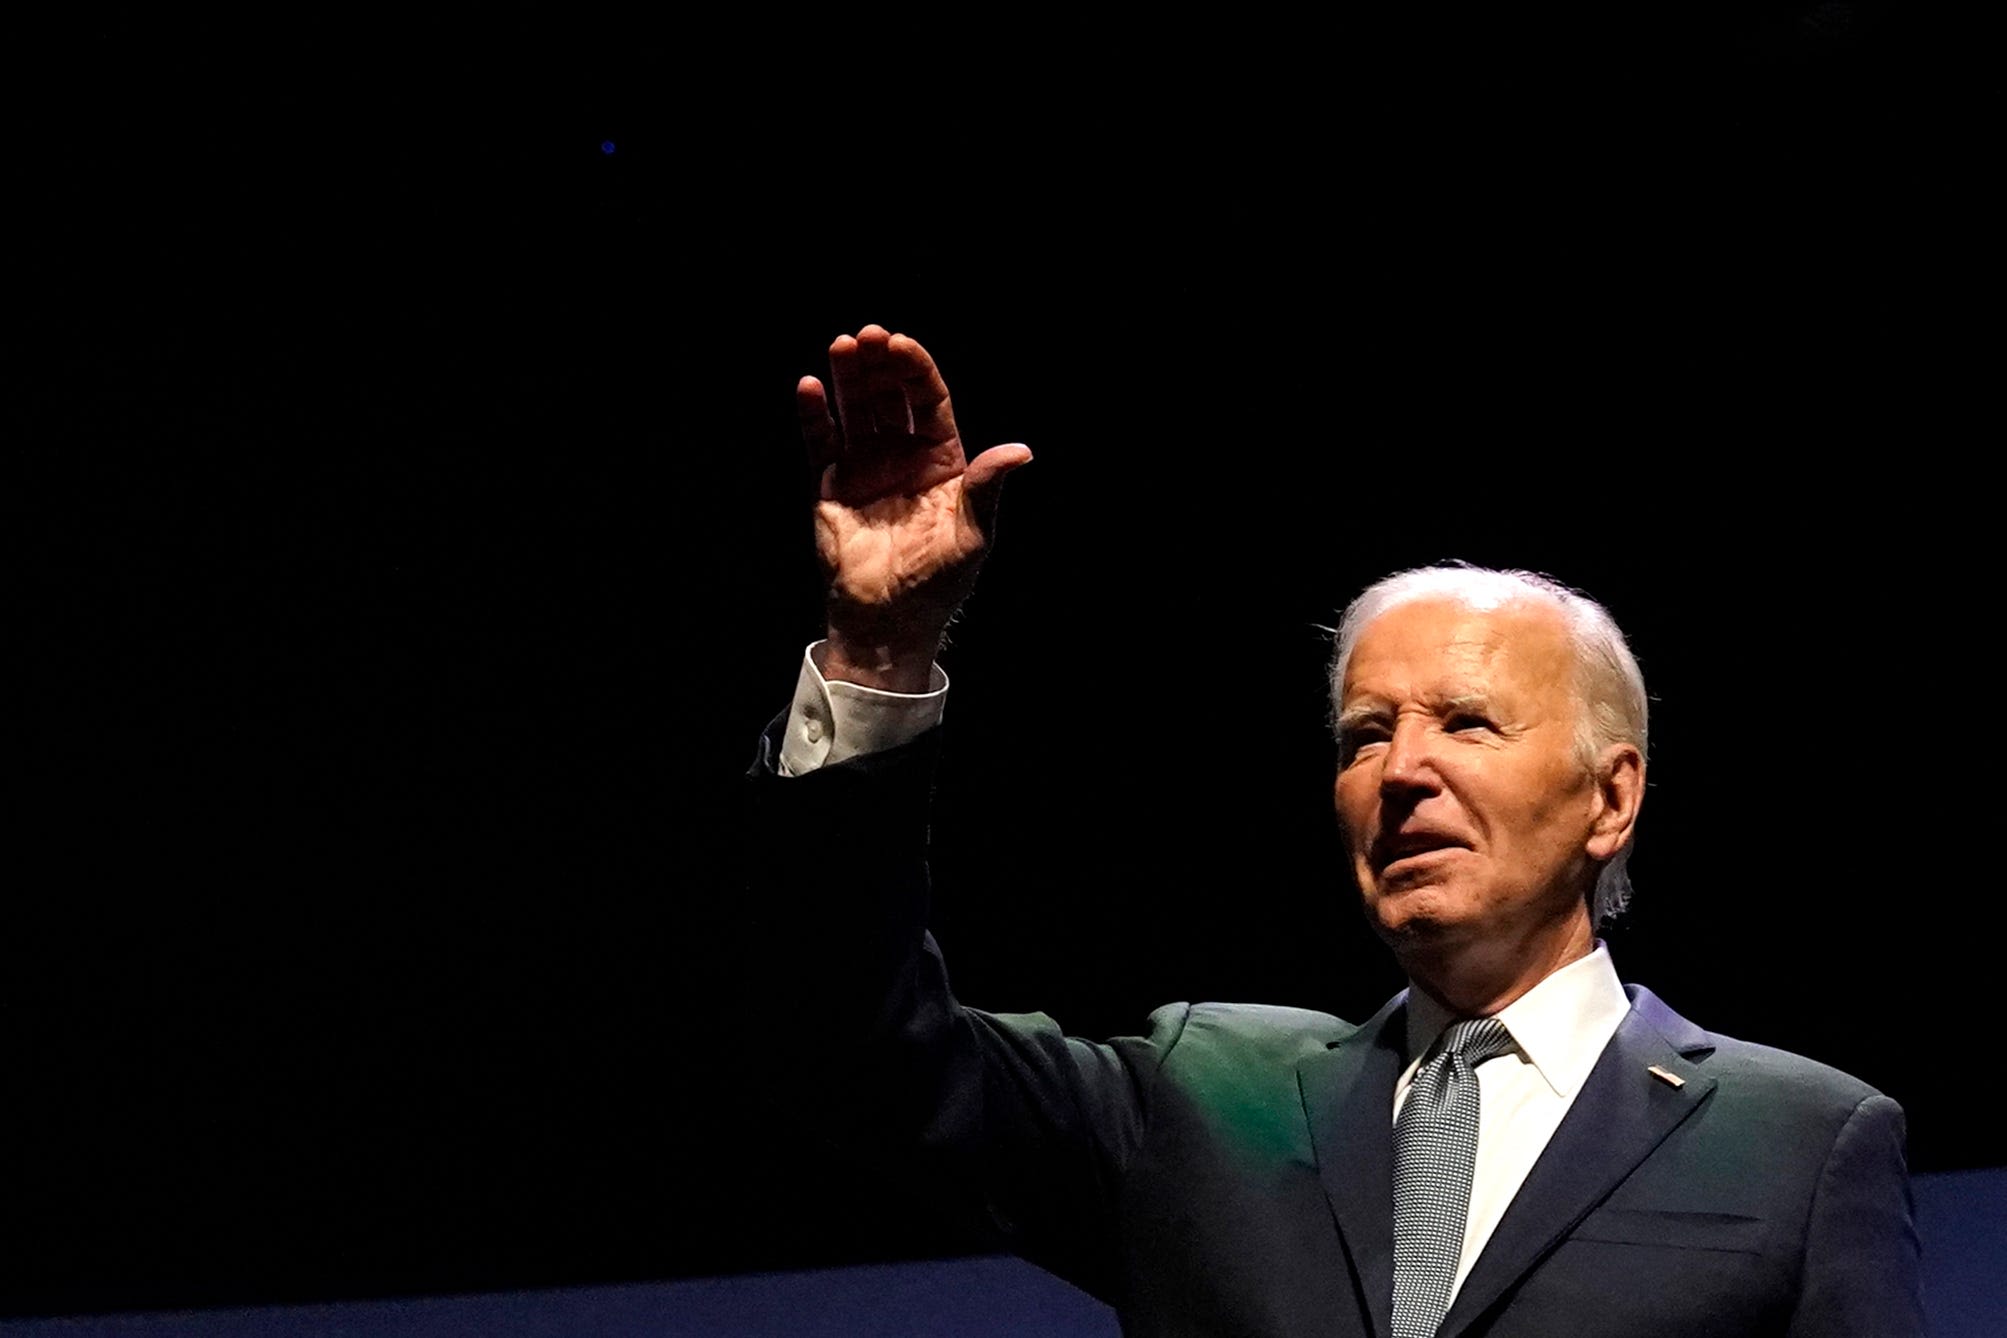 Joe Biden is out of the presidential race. What happens now?